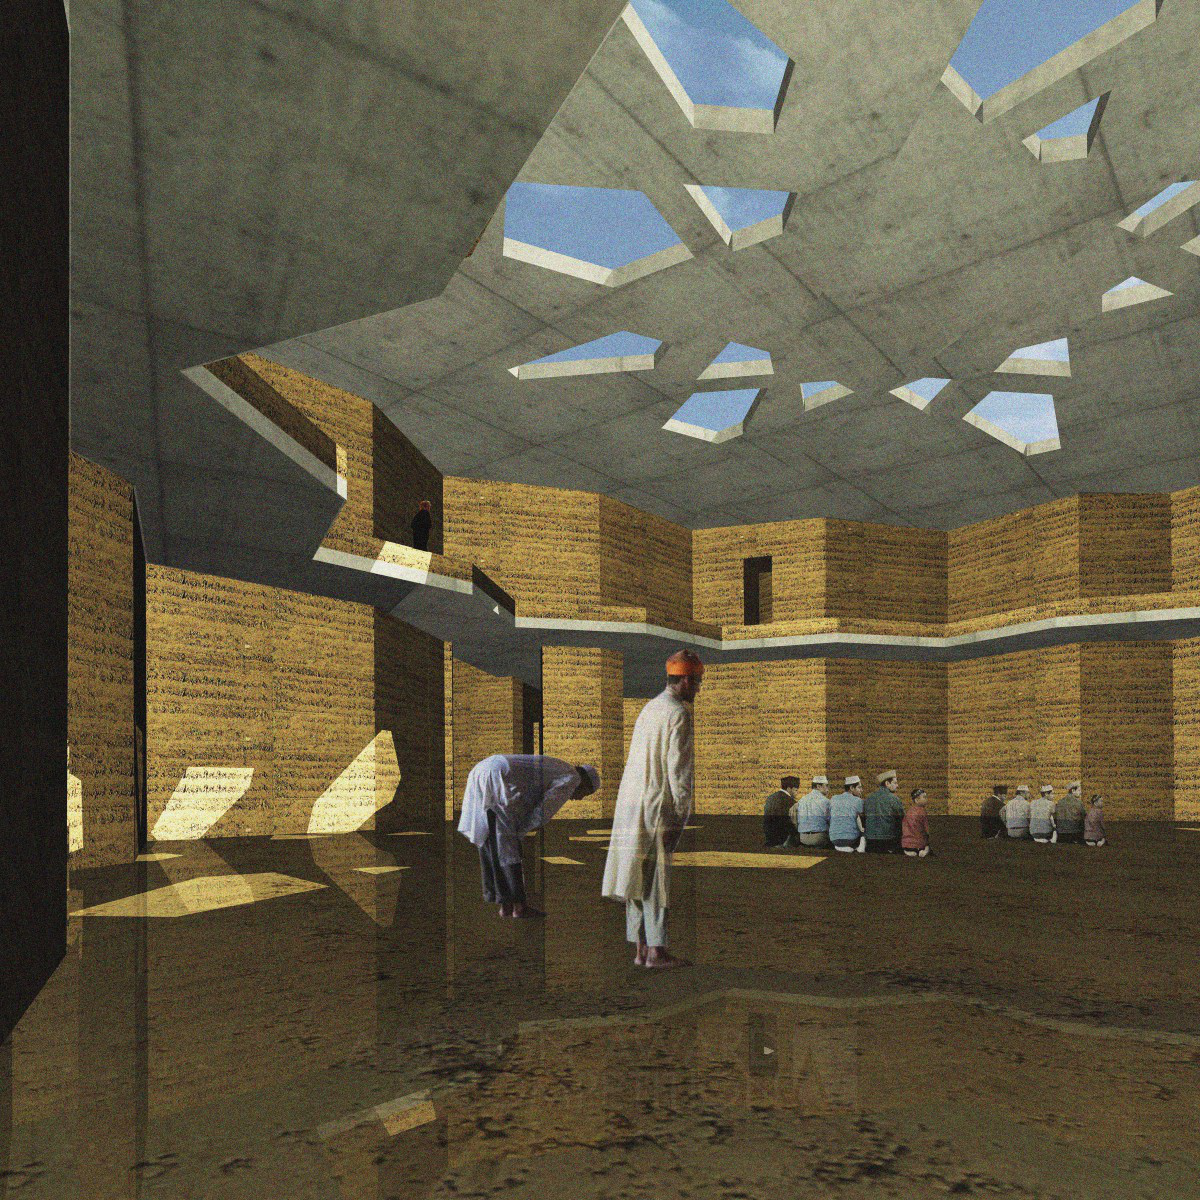 Friday Mosque, UAE Religious, educational and social facility by Florian Berner